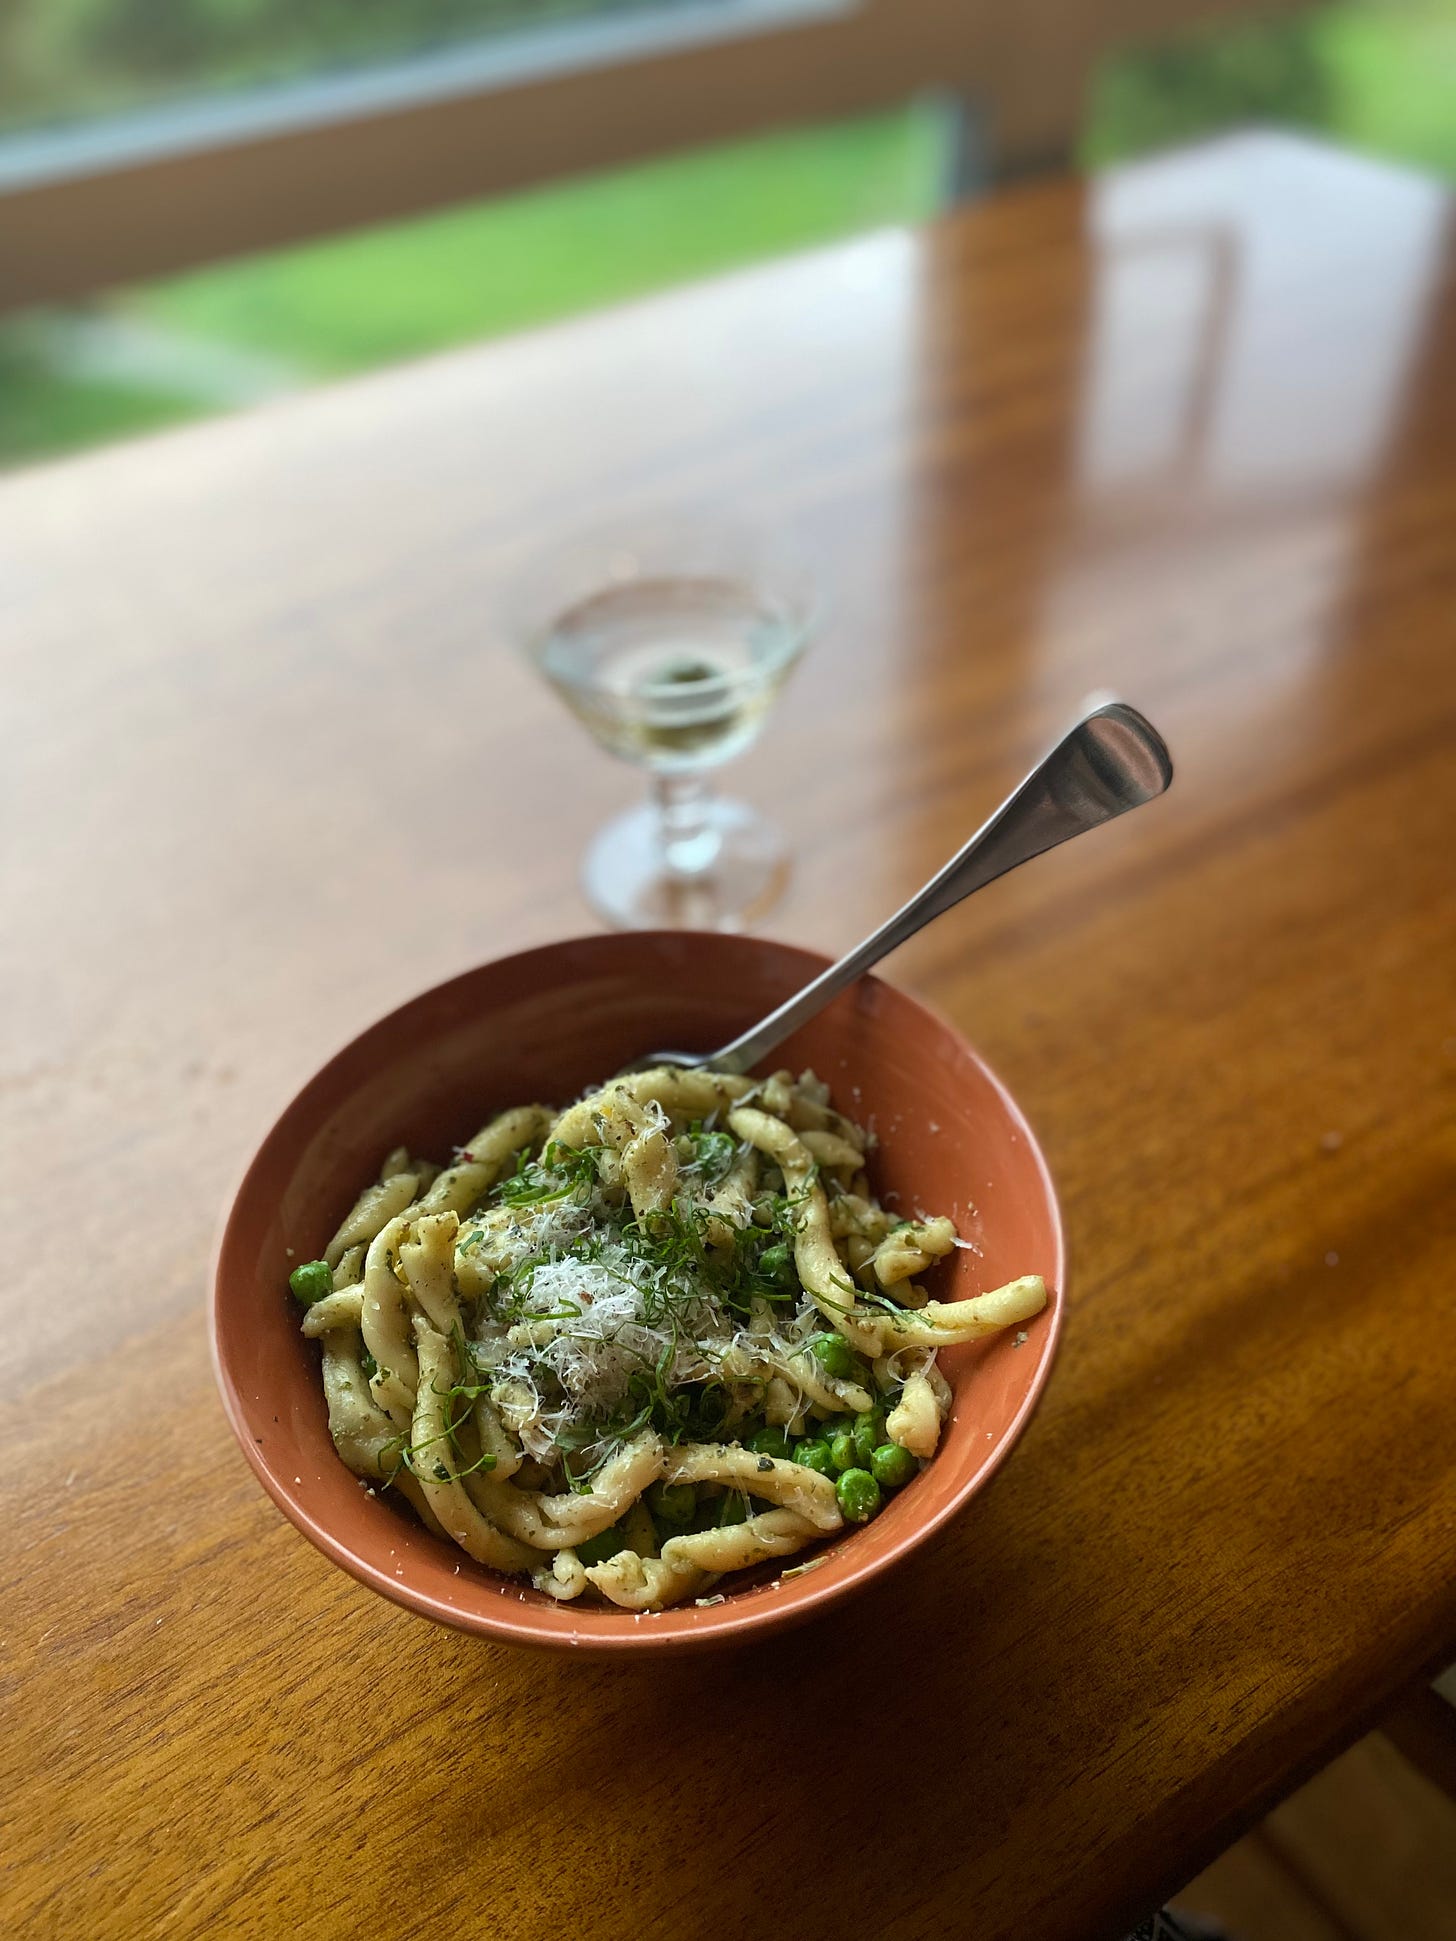 An orange bowl of medium-length twisty pasta in pesto sauce with peas, topped with basil chiffonade, grated parmesan, and cracked pepper. In the background is a martini in a coupé glass.